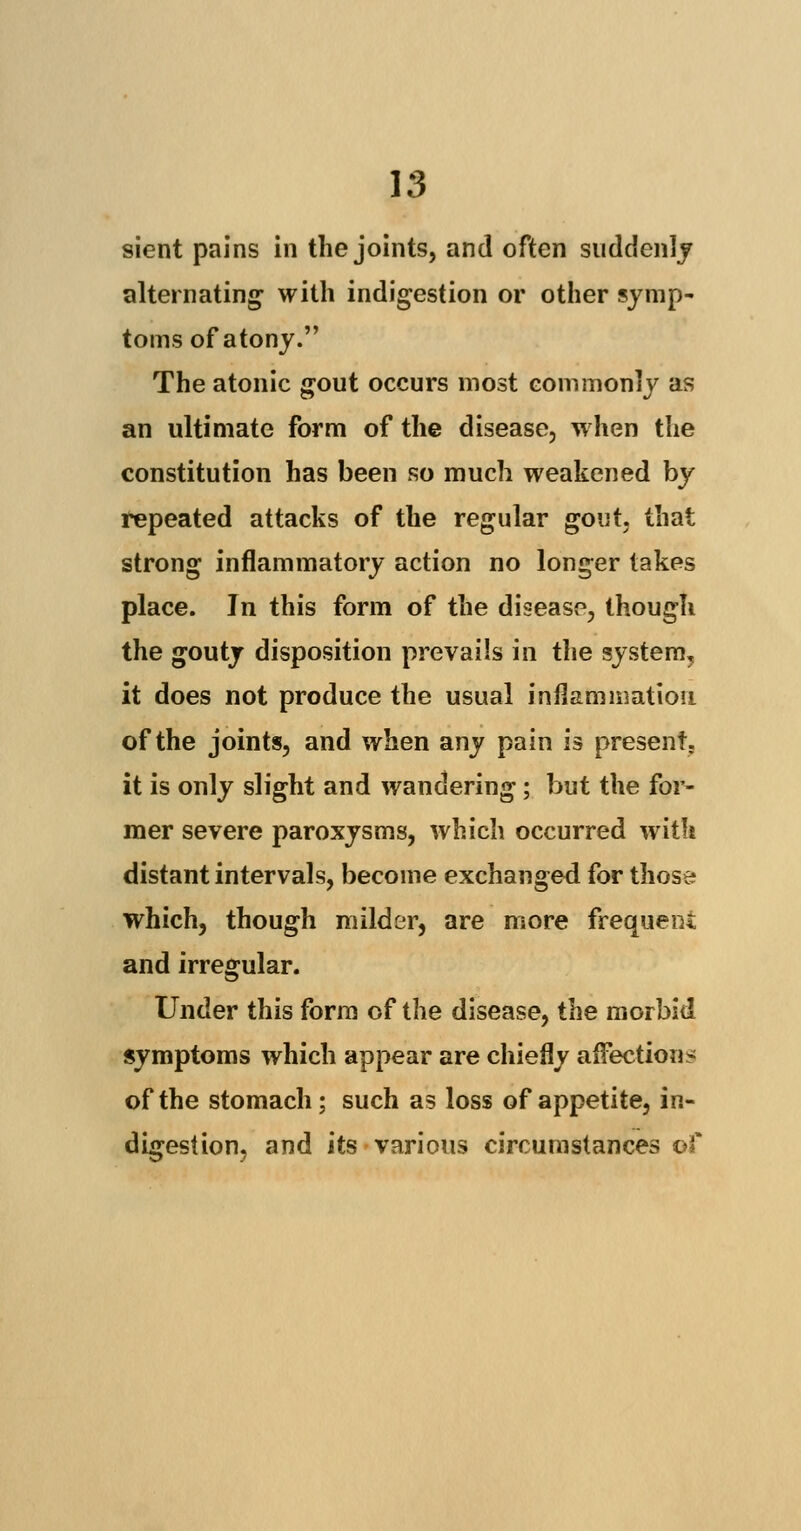 sient pains in the joints, and often suddenly alternating with indigestion or other symp- toms of atony. The atonic gout occurs most commonly as an ultimate form of the disease, when the constitution has been so much weakened by repeated attacks of the regular gout, that strong inflammatory action no longer takes place. In this form of the disease, though the gouty disposition prevails in the system^ it does not produce the usual inflammation of the joints, and when any pain is present. it is only slight and wandering; but the for- mer severe paroxysms, which occurred with distant intervals, become exchanged for those which, though milder, are more frequent and irregular. Under this form of the disease, the morbid symptoms which appear are chiefly affections of the stomach; such as loss of appetite, in- digestion, and its various circumstances of